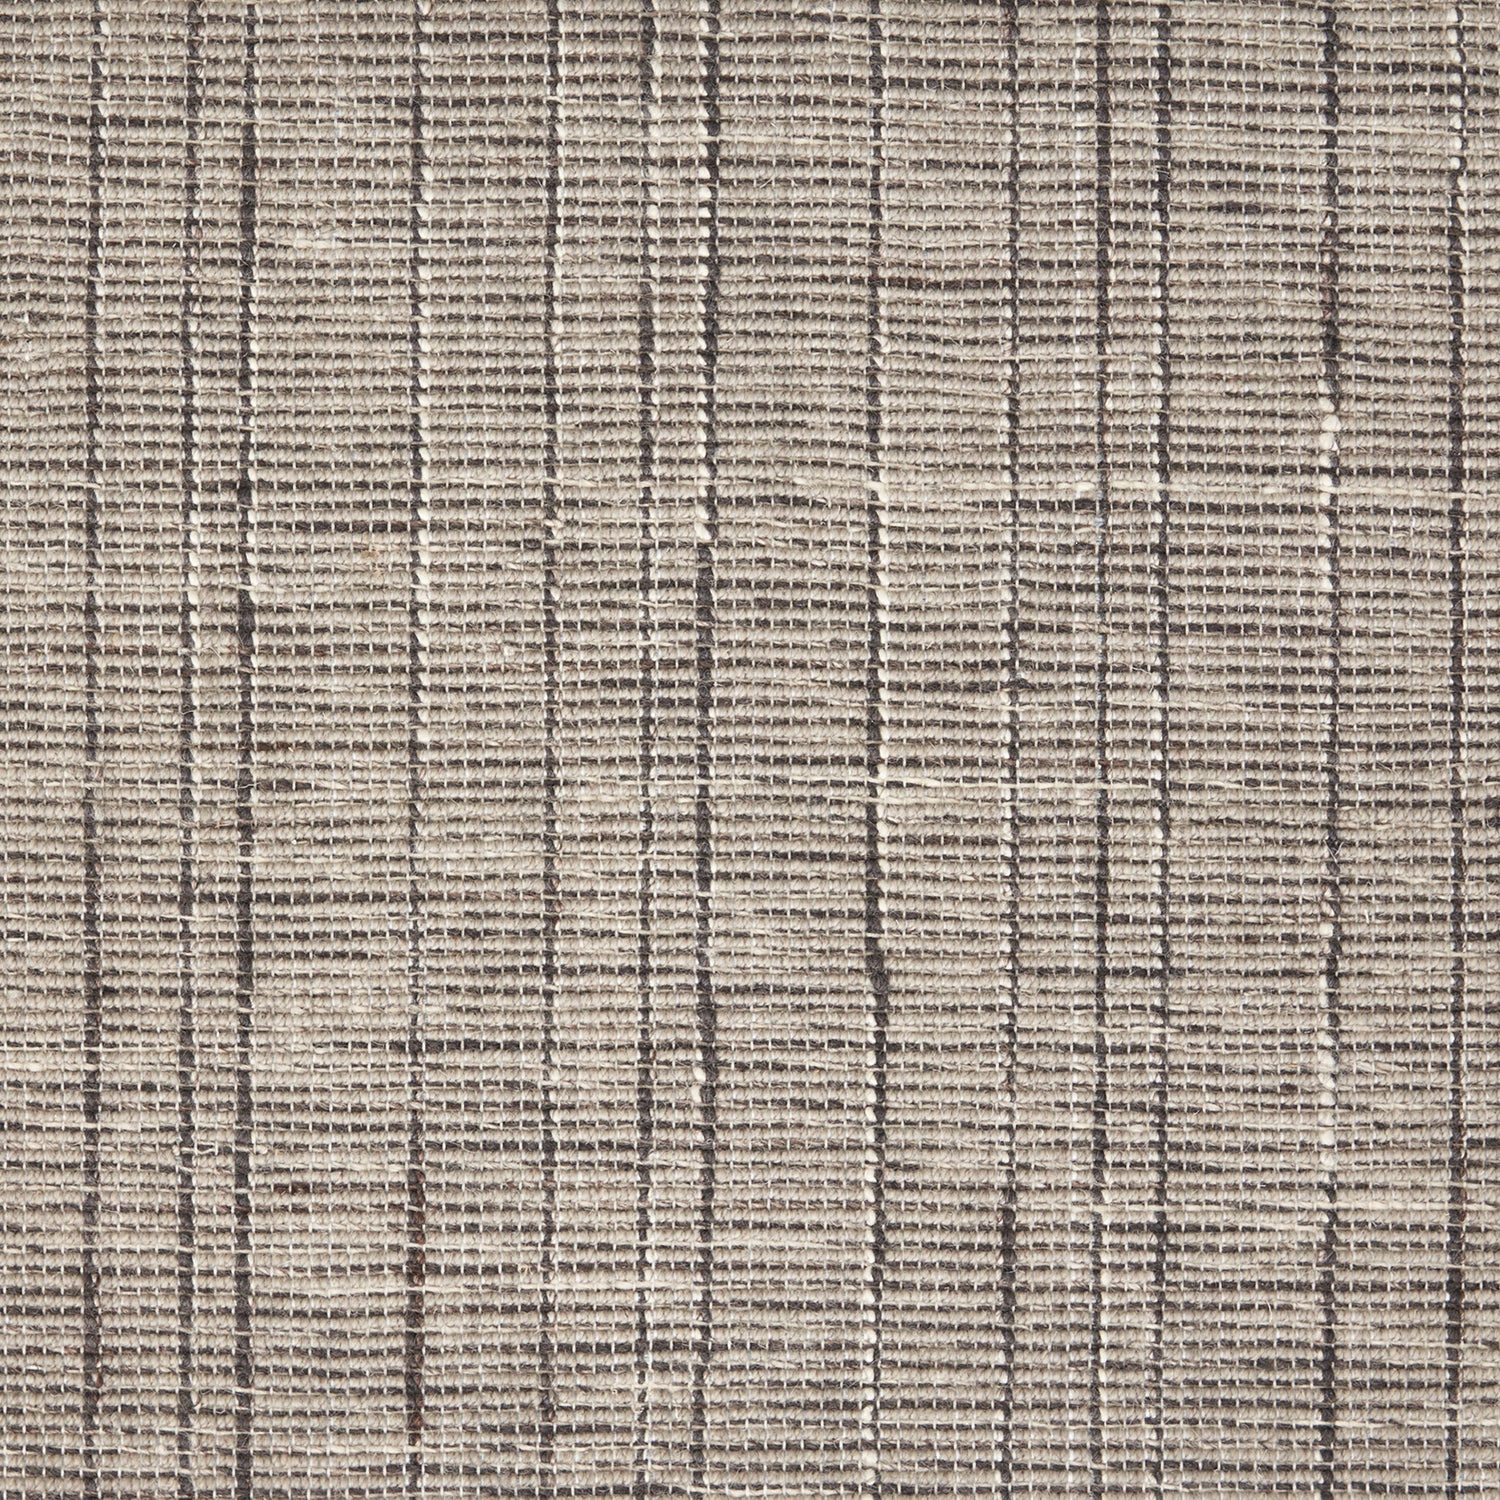 Wool-nylon broadloom carpet swatch in a textured plaid weave in shades of brown.